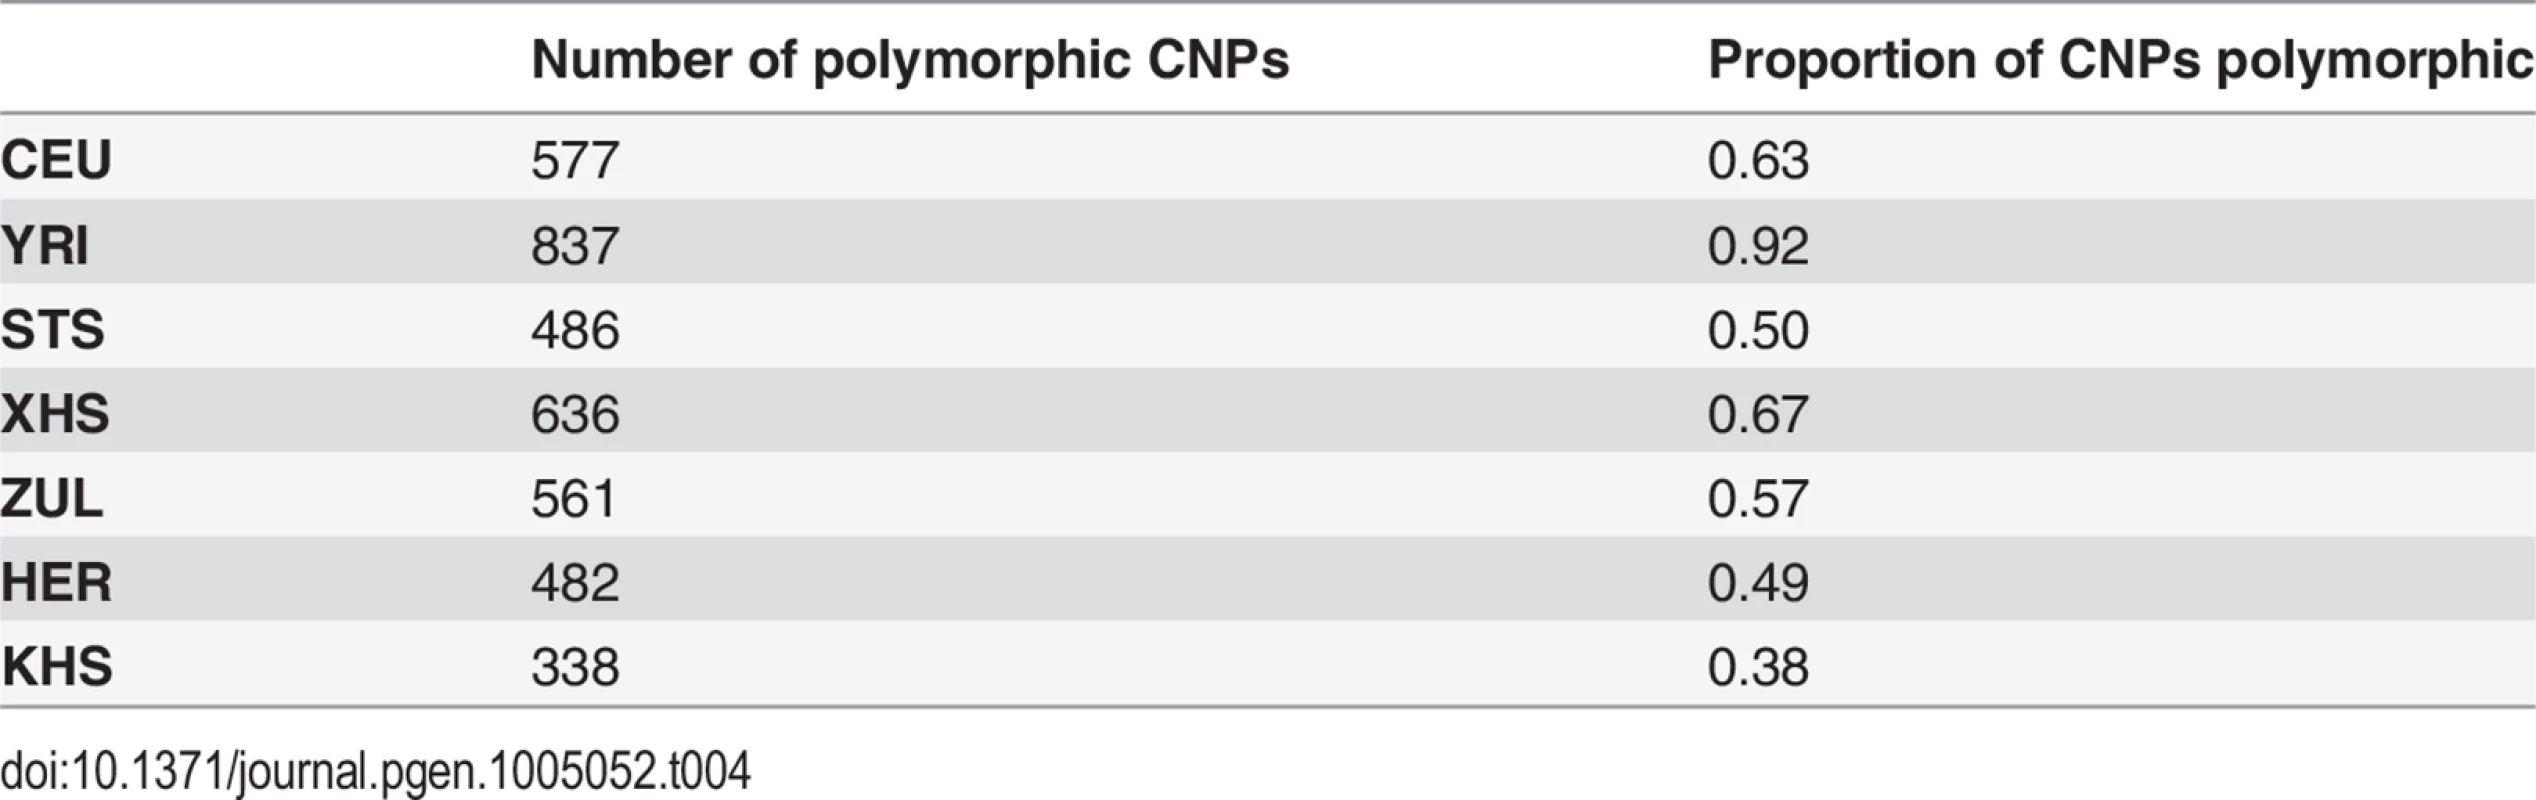 Number of known copy number polymorphisms (of a total of 1130 autosomal CNPs) that are polymorphic in each analysis panel.